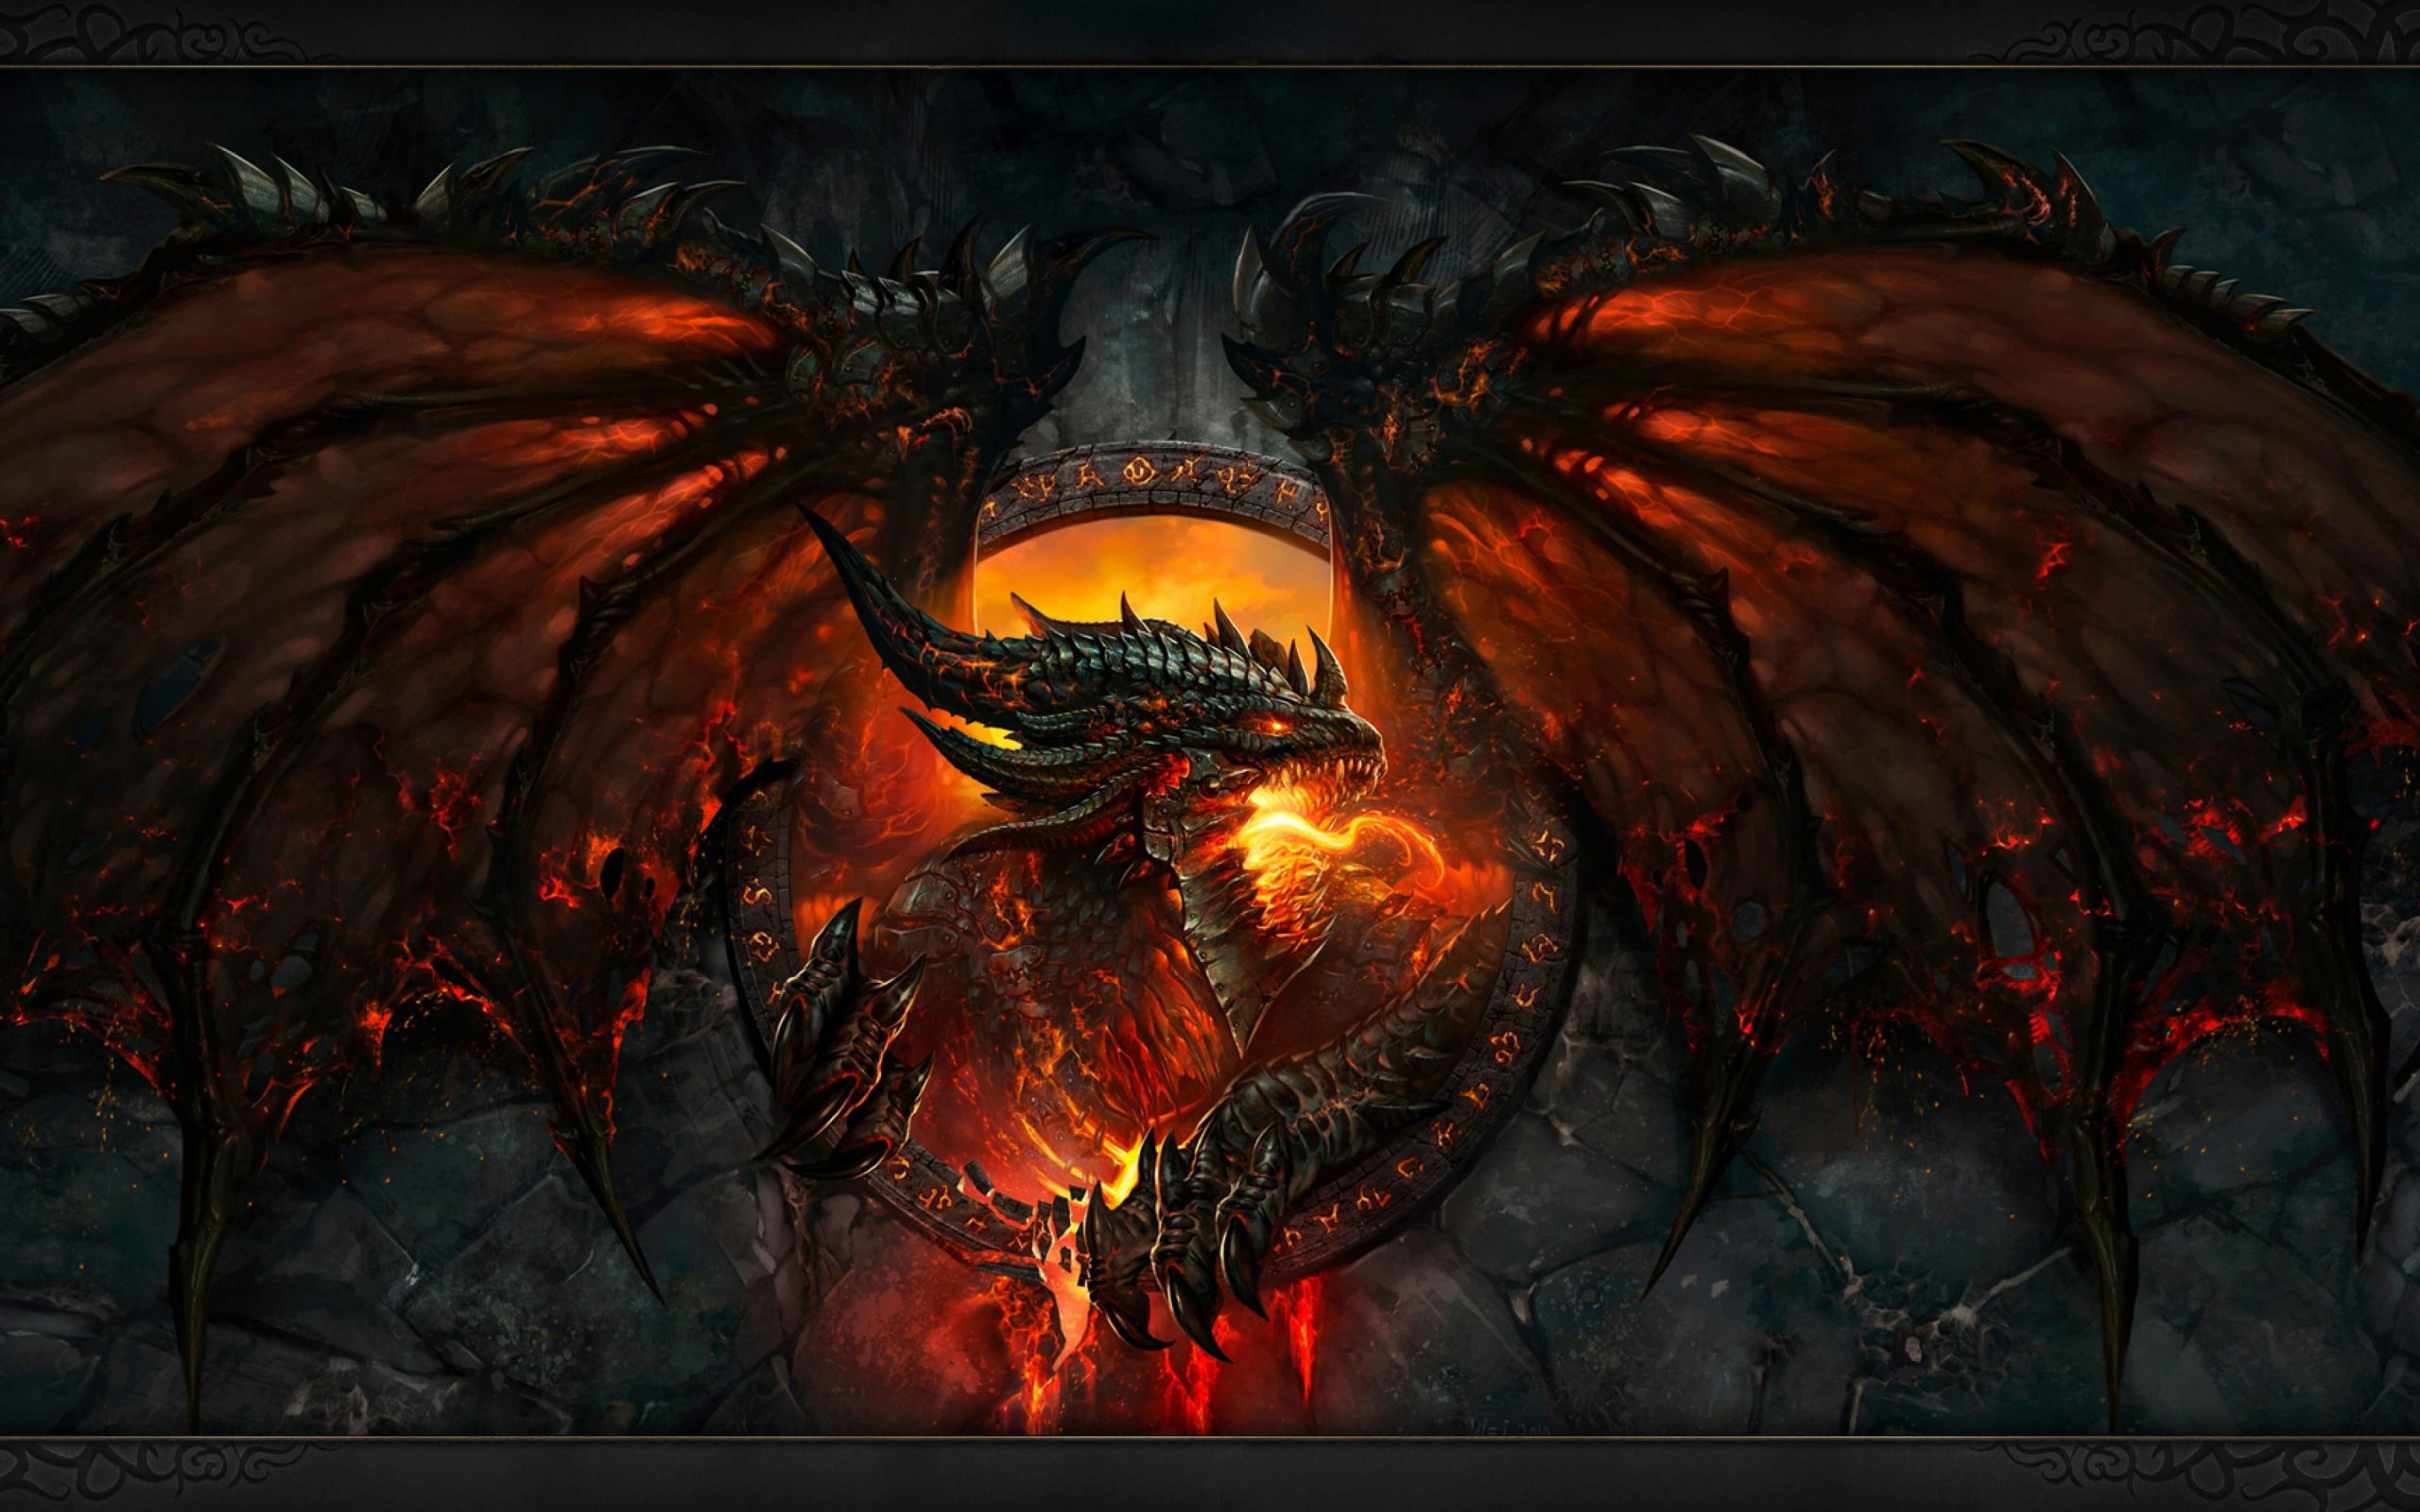 World Of Warcraft wallpaper,dragon deathwing lava wow fire world of warcraft video game epic